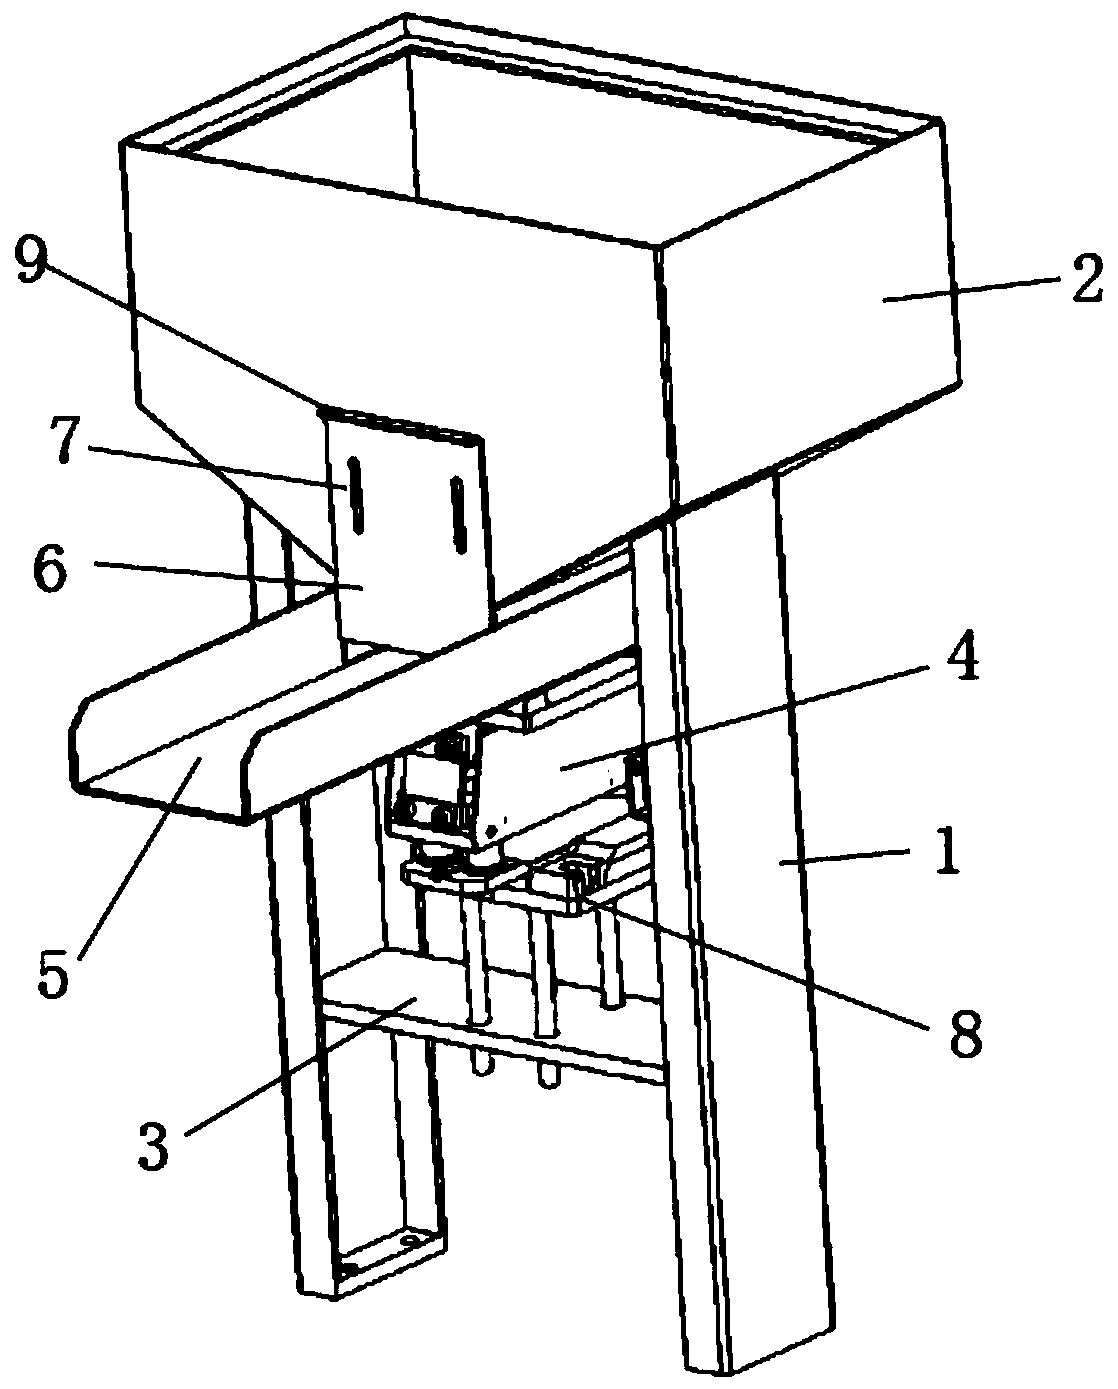 General assembly supply device